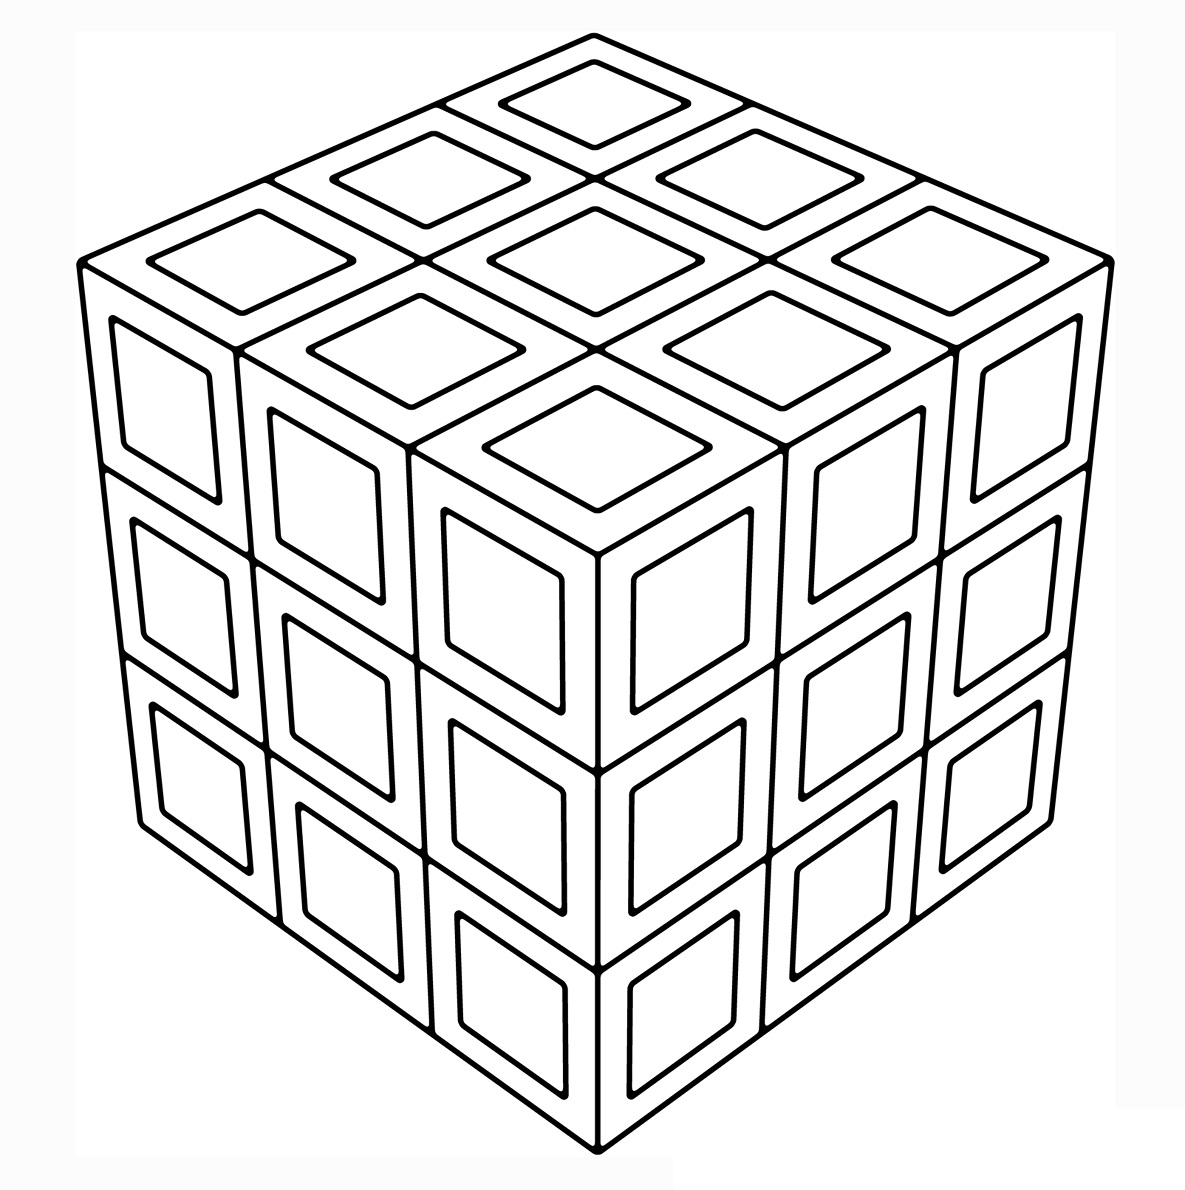 Cubic Geometric Coloring Page - Free Printable Coloring Pages for Kids